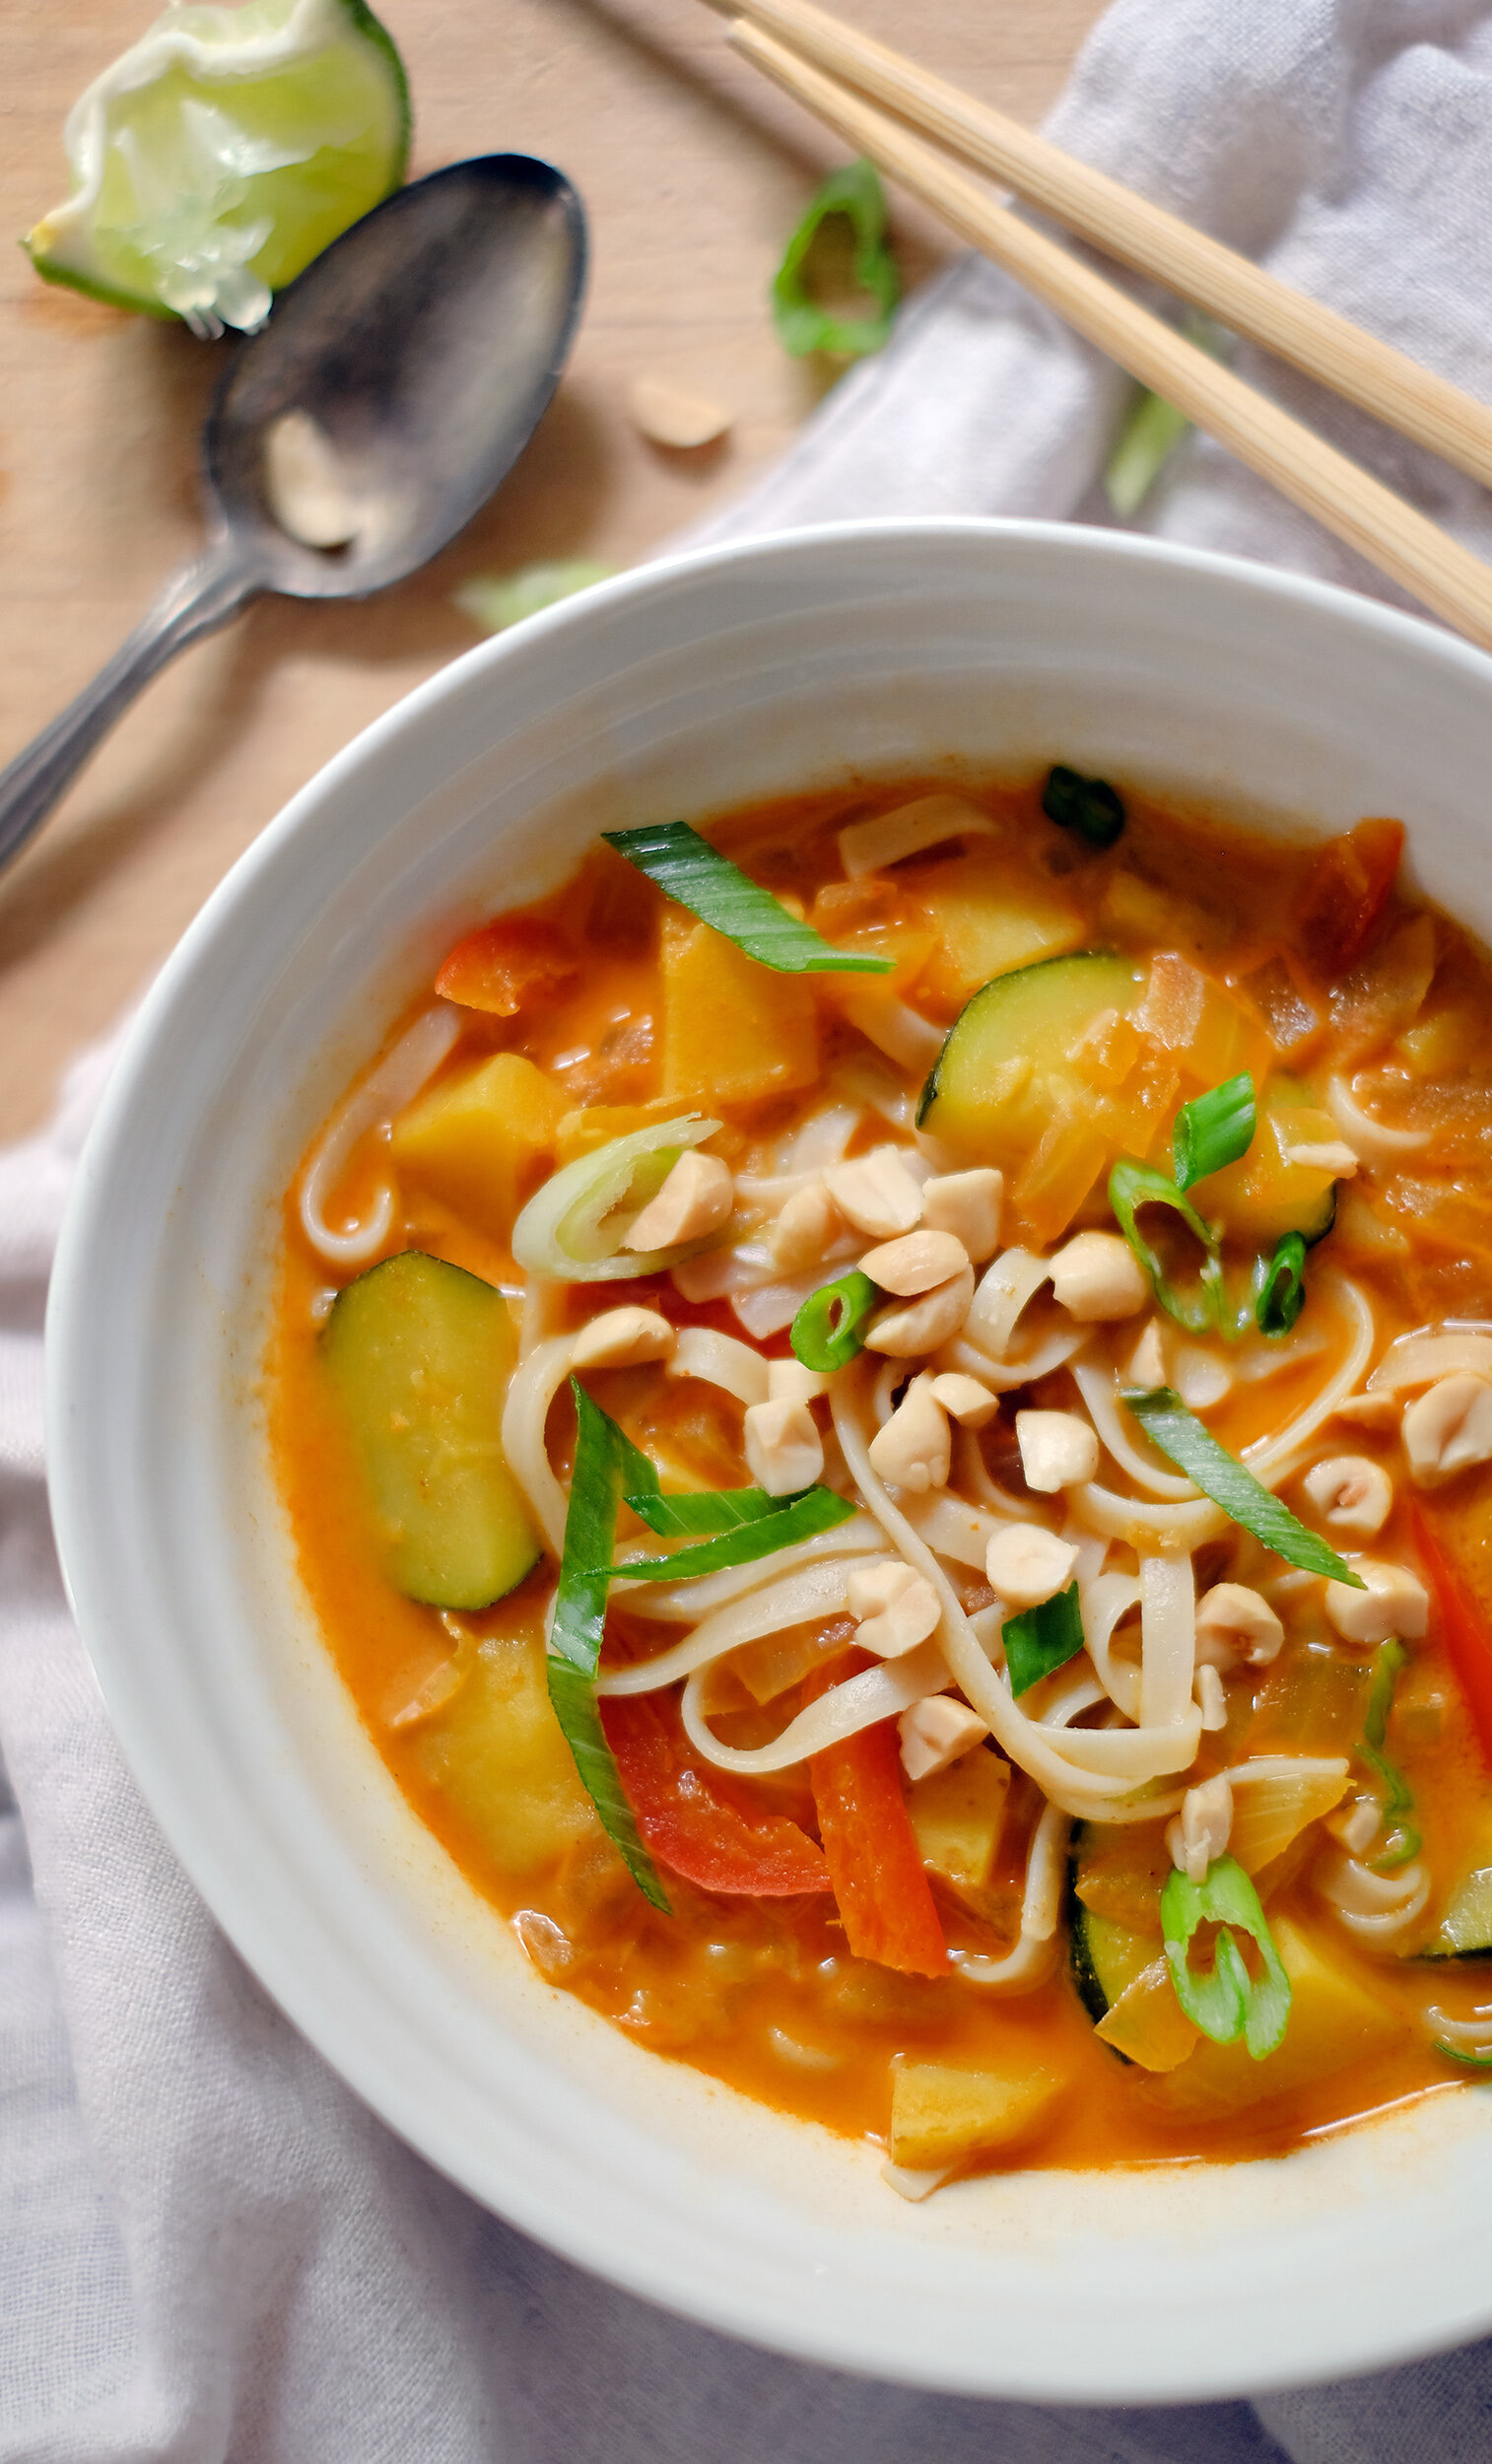 Vegan Thai Curry Soup with Noodles. Yes, please. — GLOBAL DISH